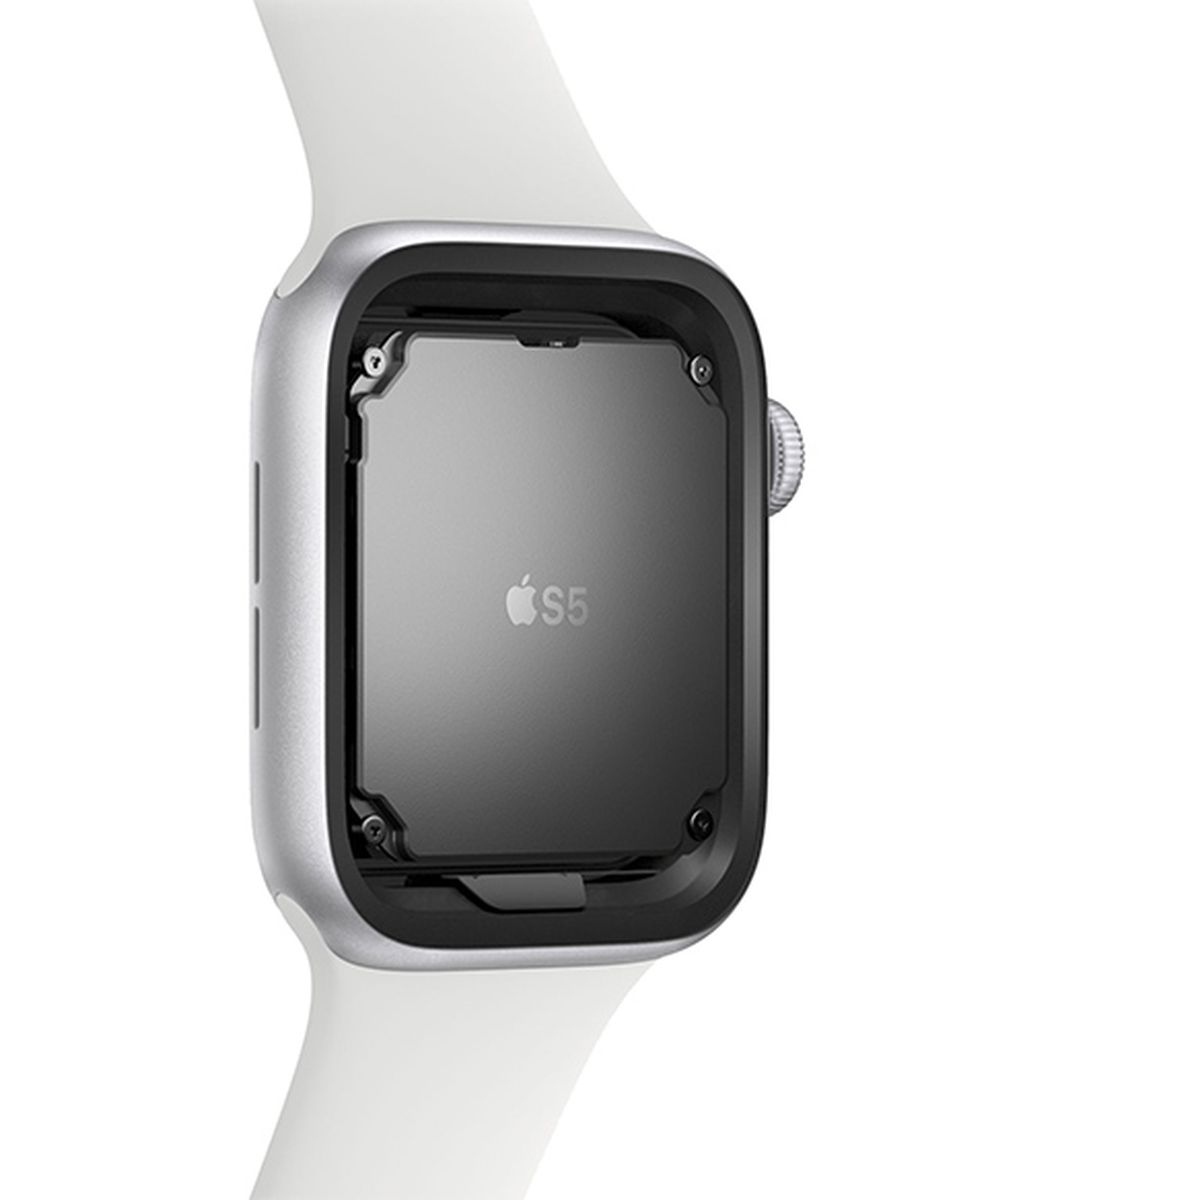 Apple Watch SE 2 to Bring Top-Tier Chip to Budget Model for First 